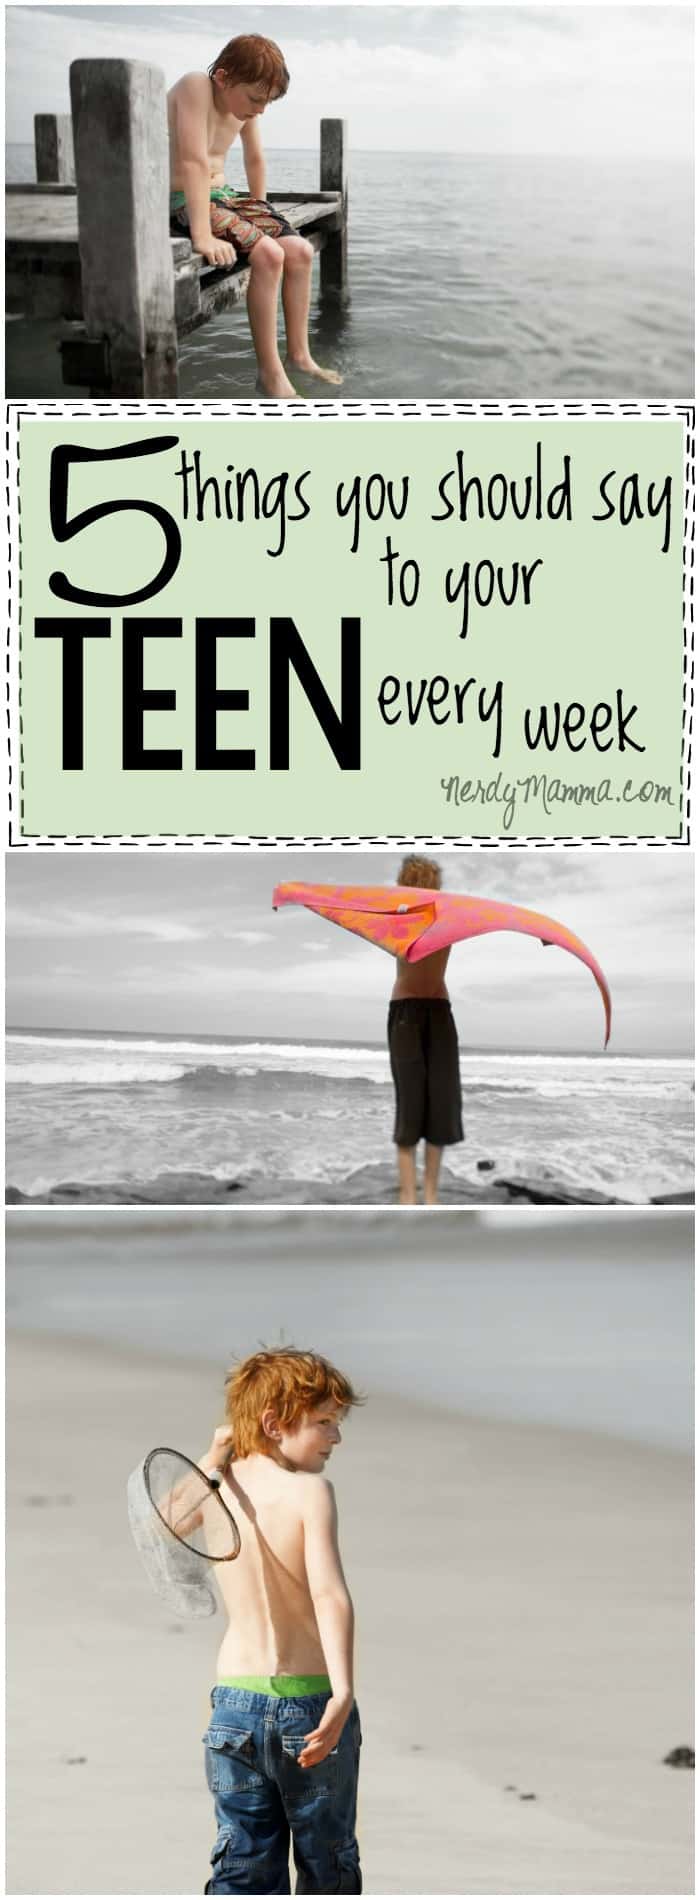 I love these 5 Things You Should Say to Your Teen Every Week! Funny, but they probably build the best confidence...